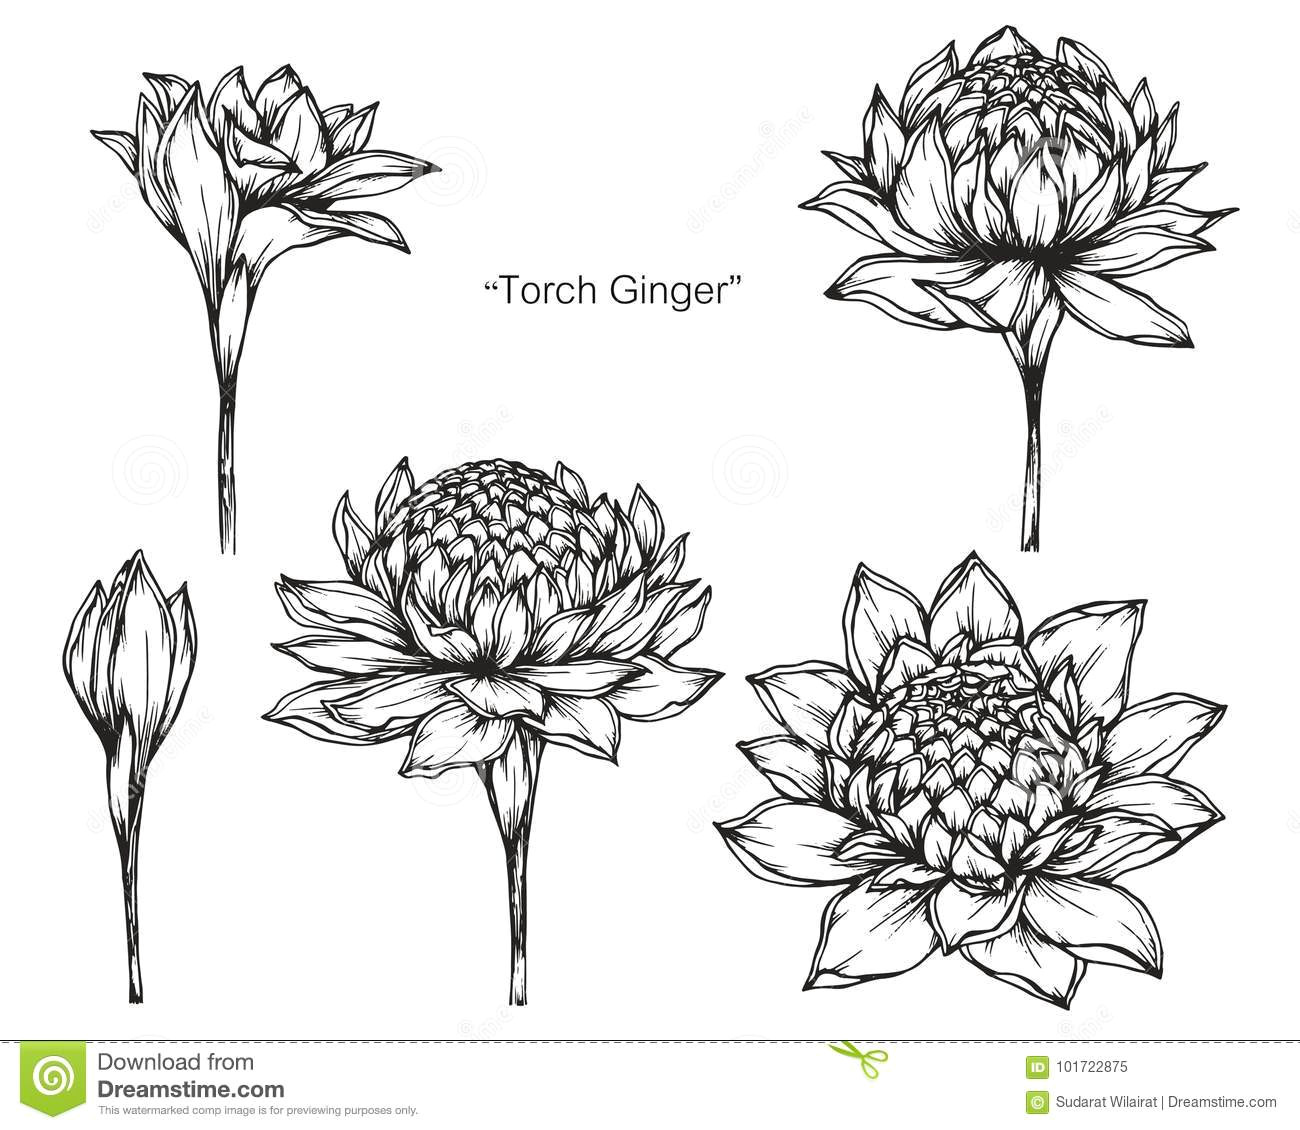 torch ginger flower drawing and sketch